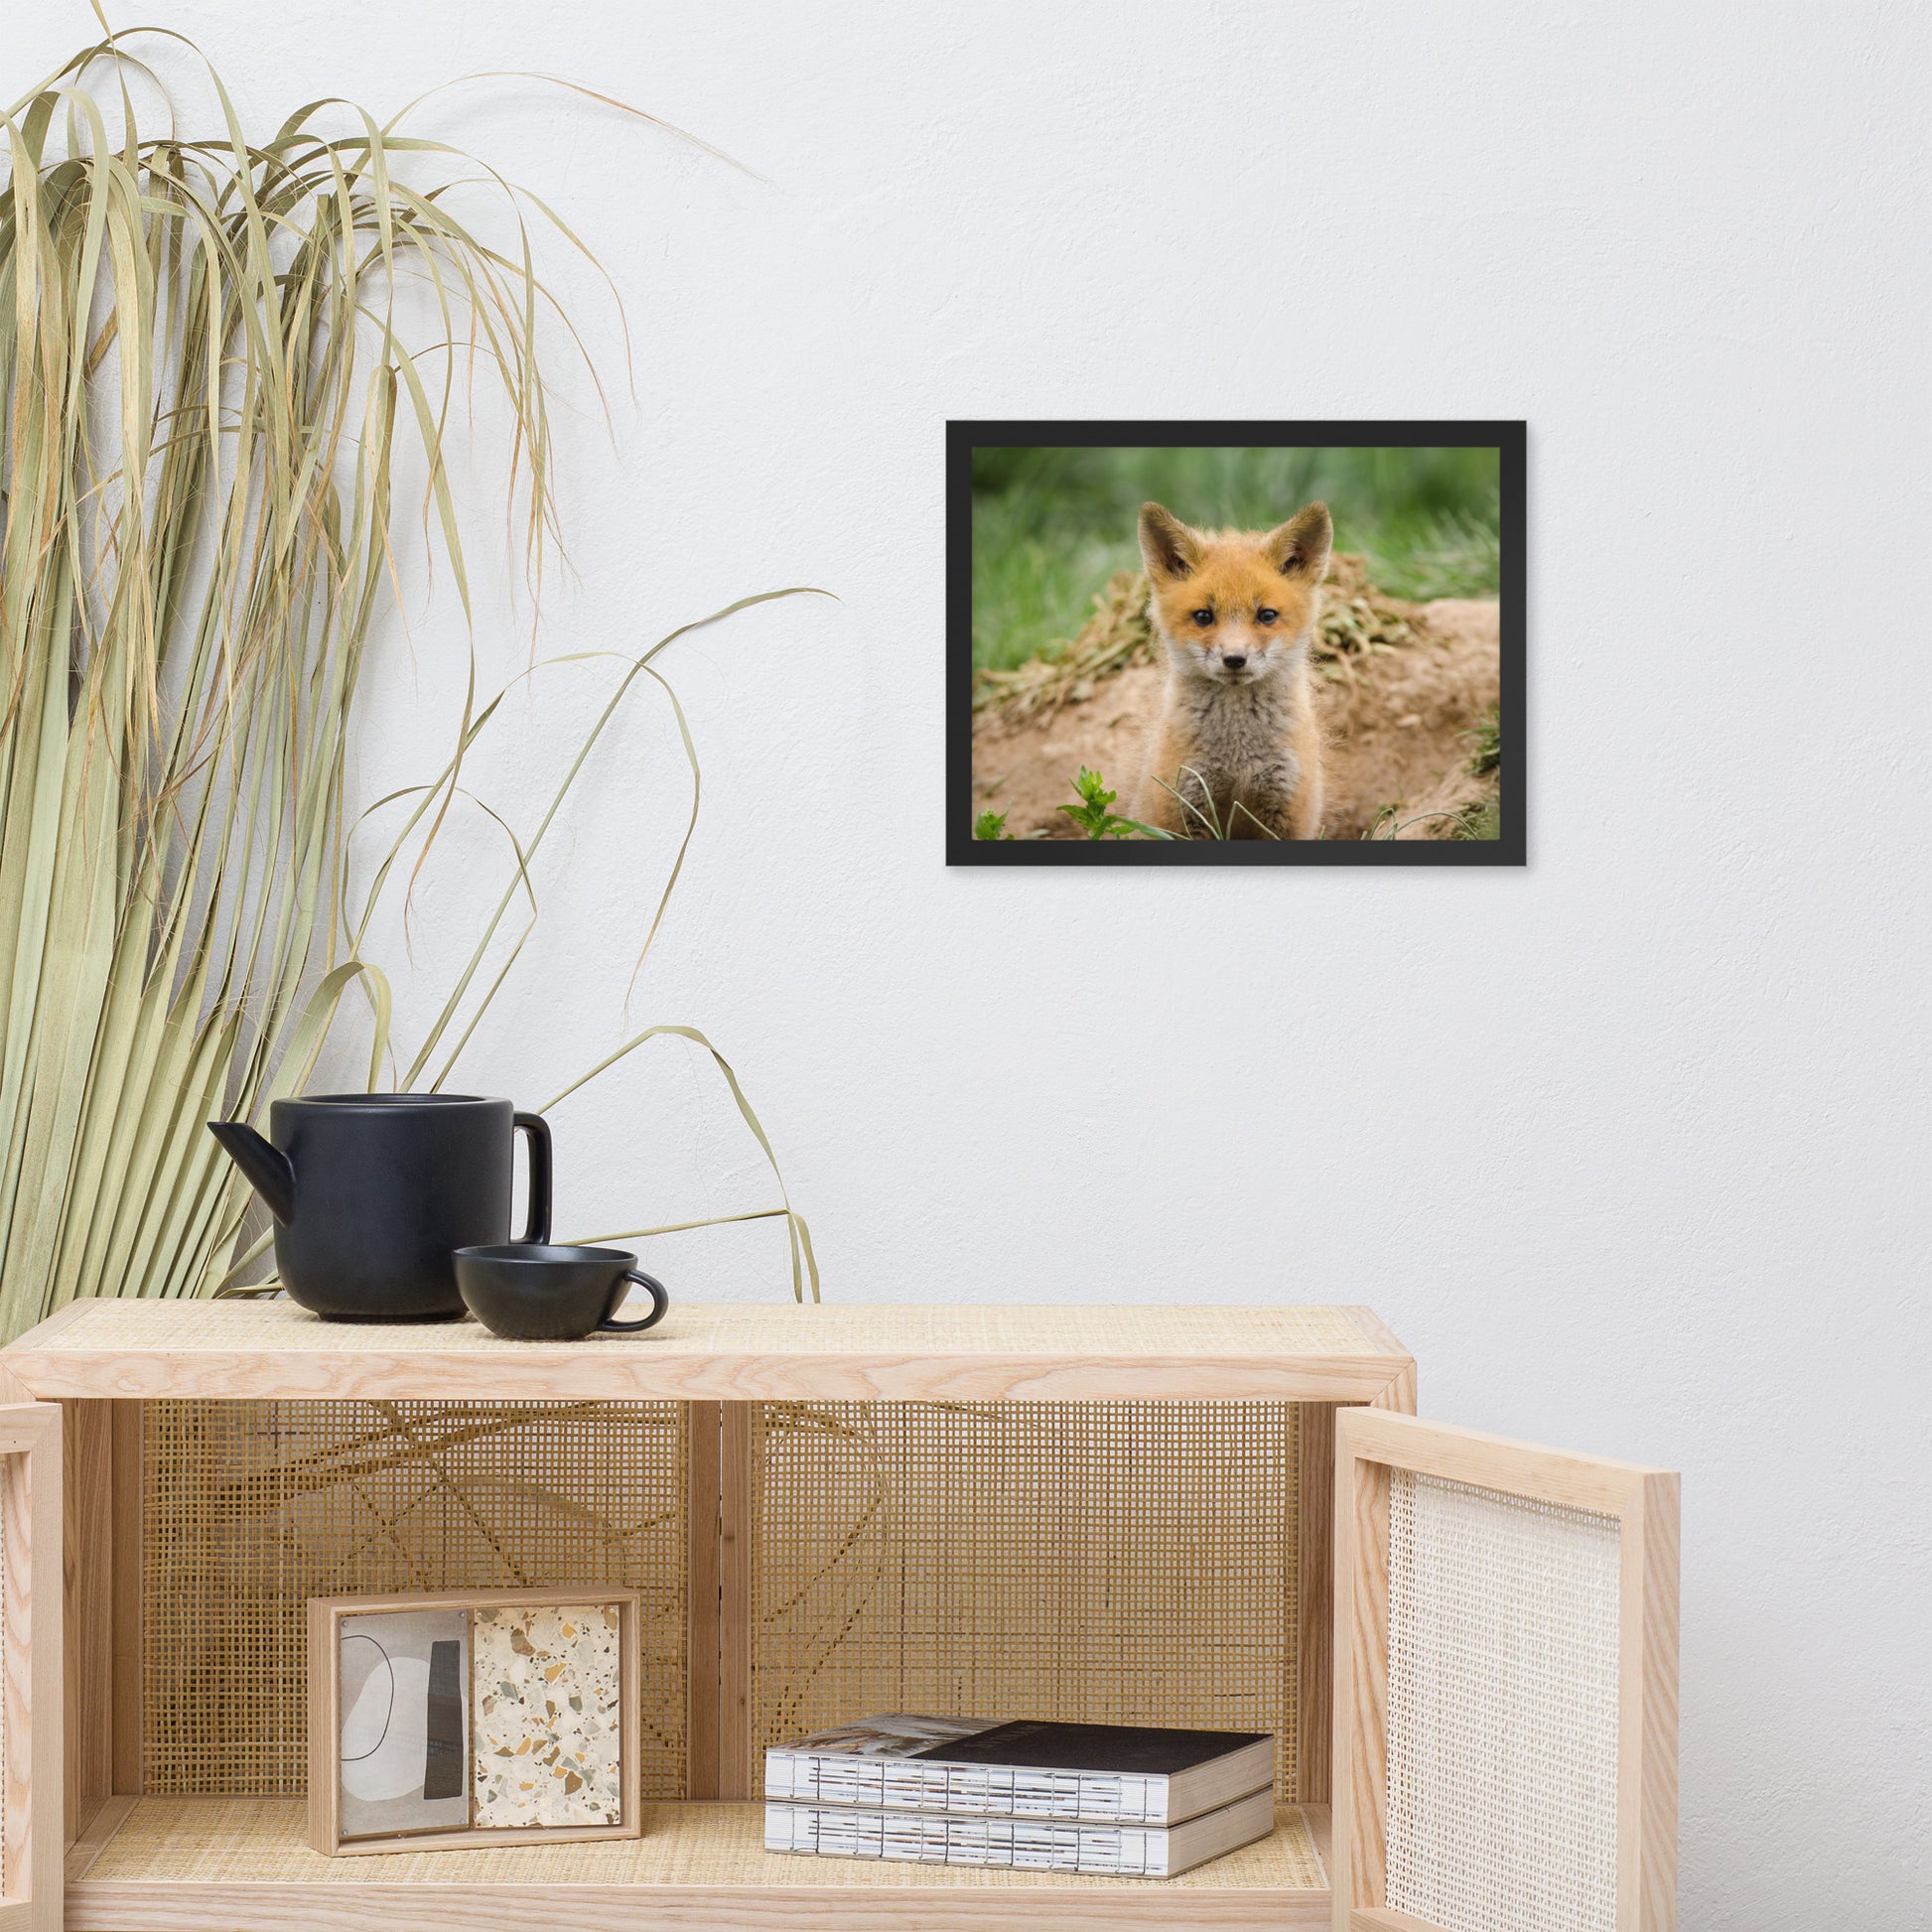 Pictures For Your Bathroom Walls: Baby Young Red Fox Kit/ Animal / Wildlife / Nature Photographic Artwork - Framed Artwork - Wall Decor